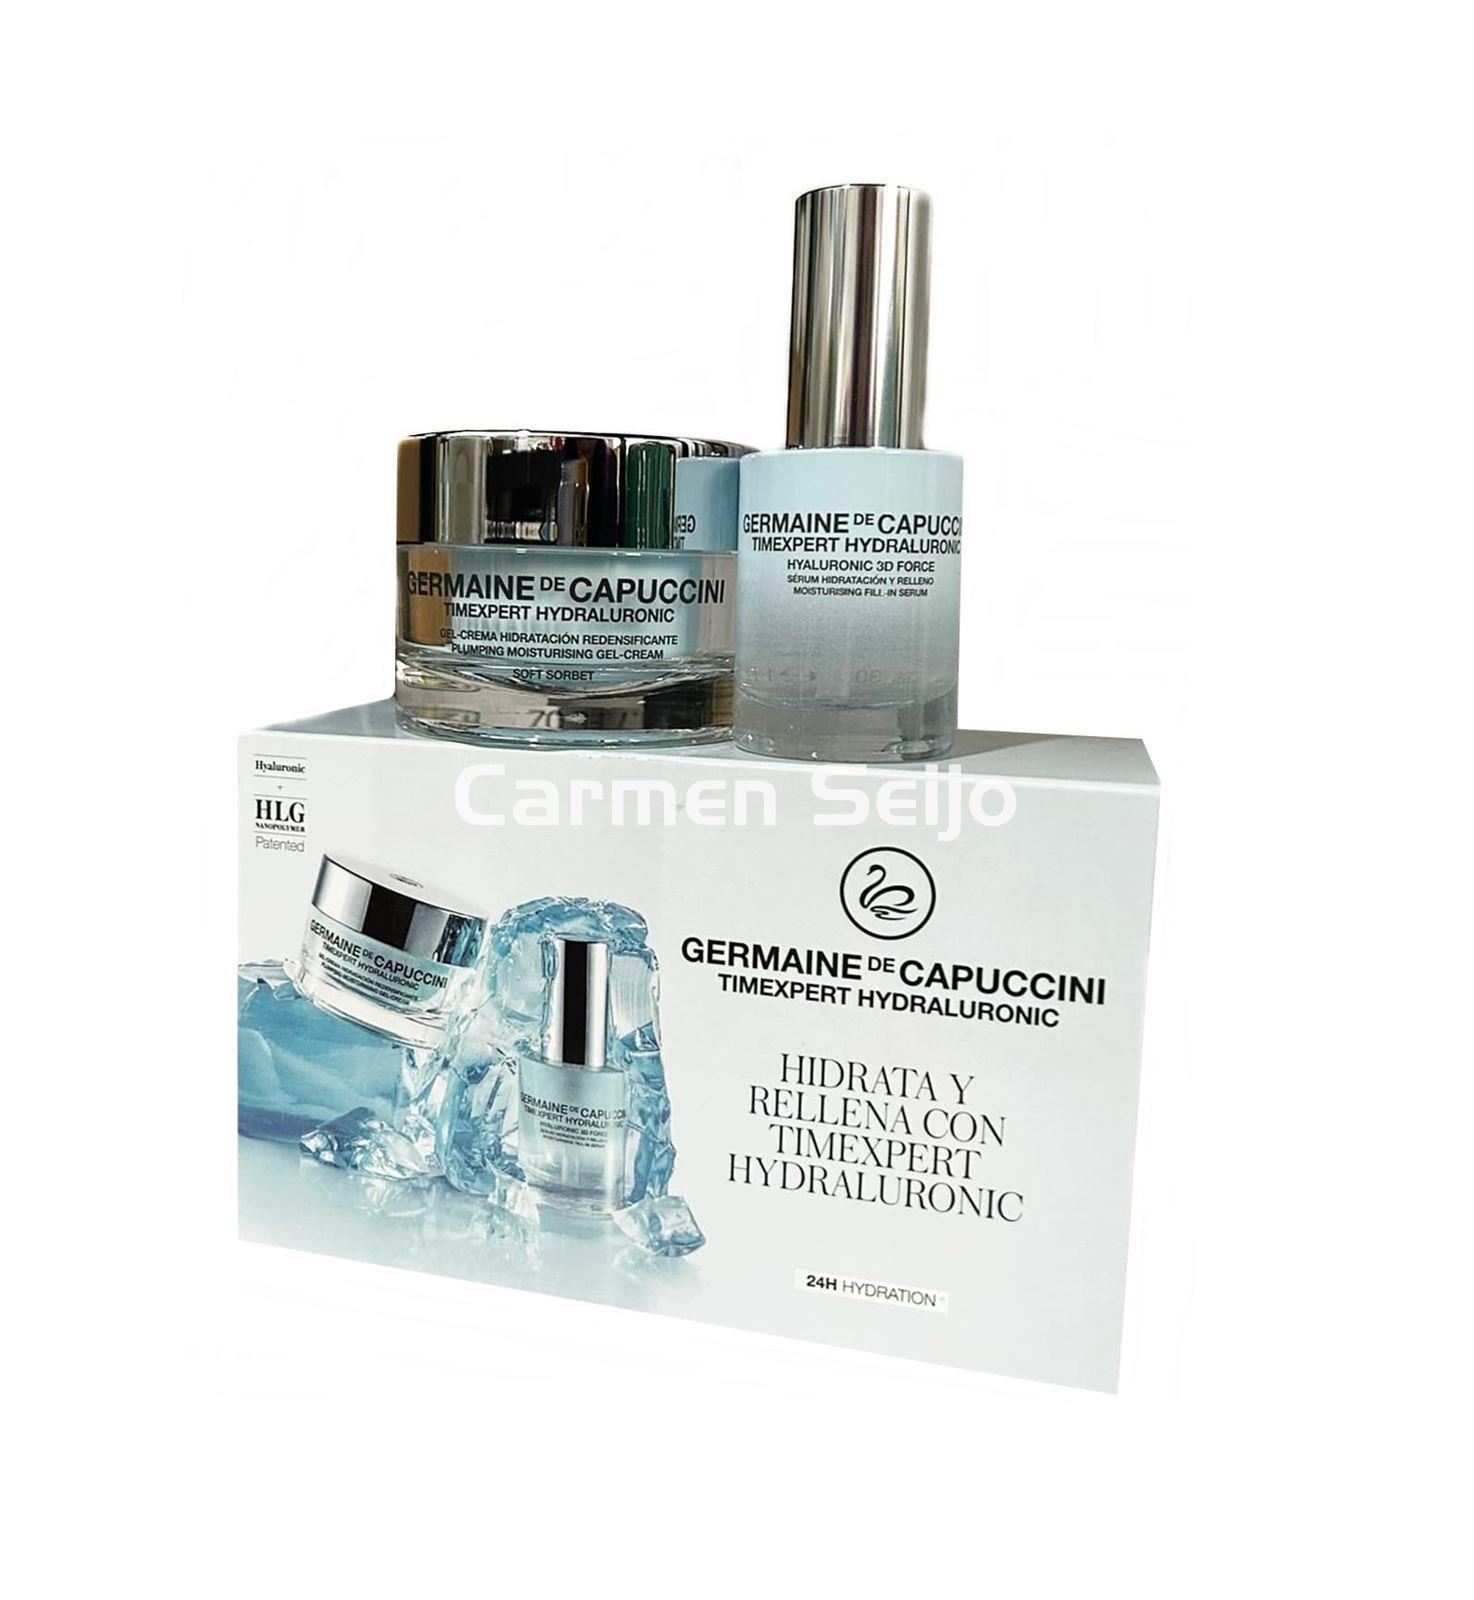 Germaine de Capuccini Pack Crema Soft Sorbet + Hyaluronic 3D Force Timexpert Hydraluronic - Imagen 1